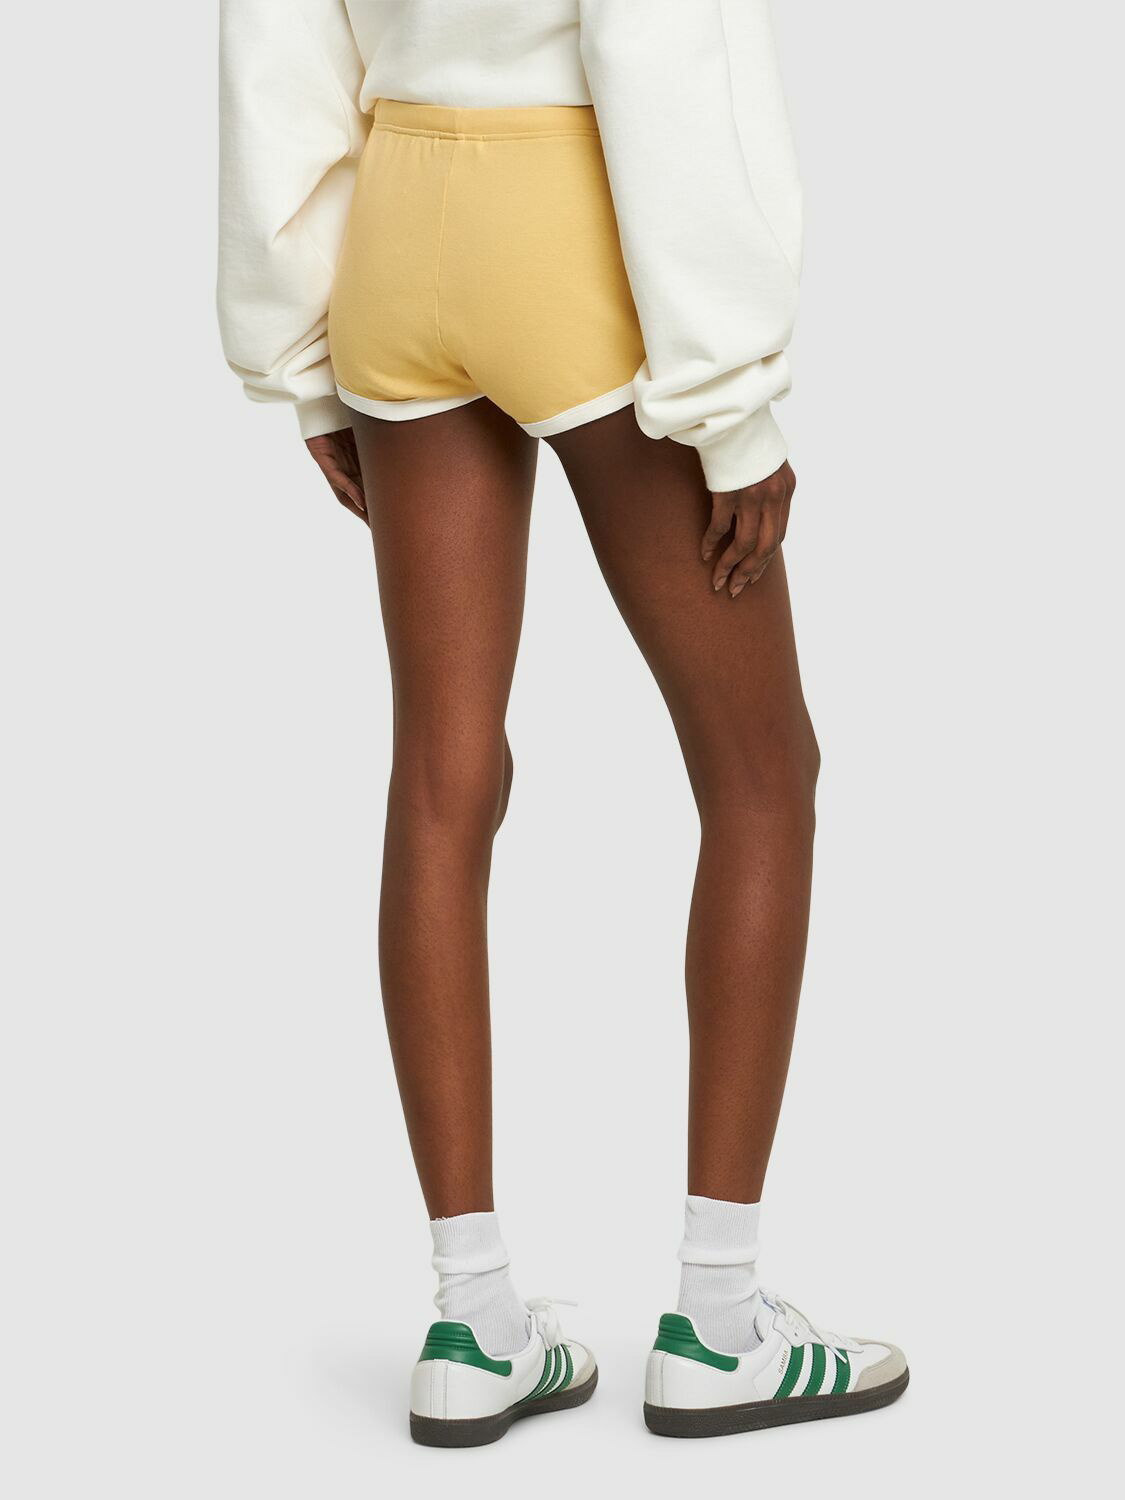 Courreges Contrast Shorts in Black